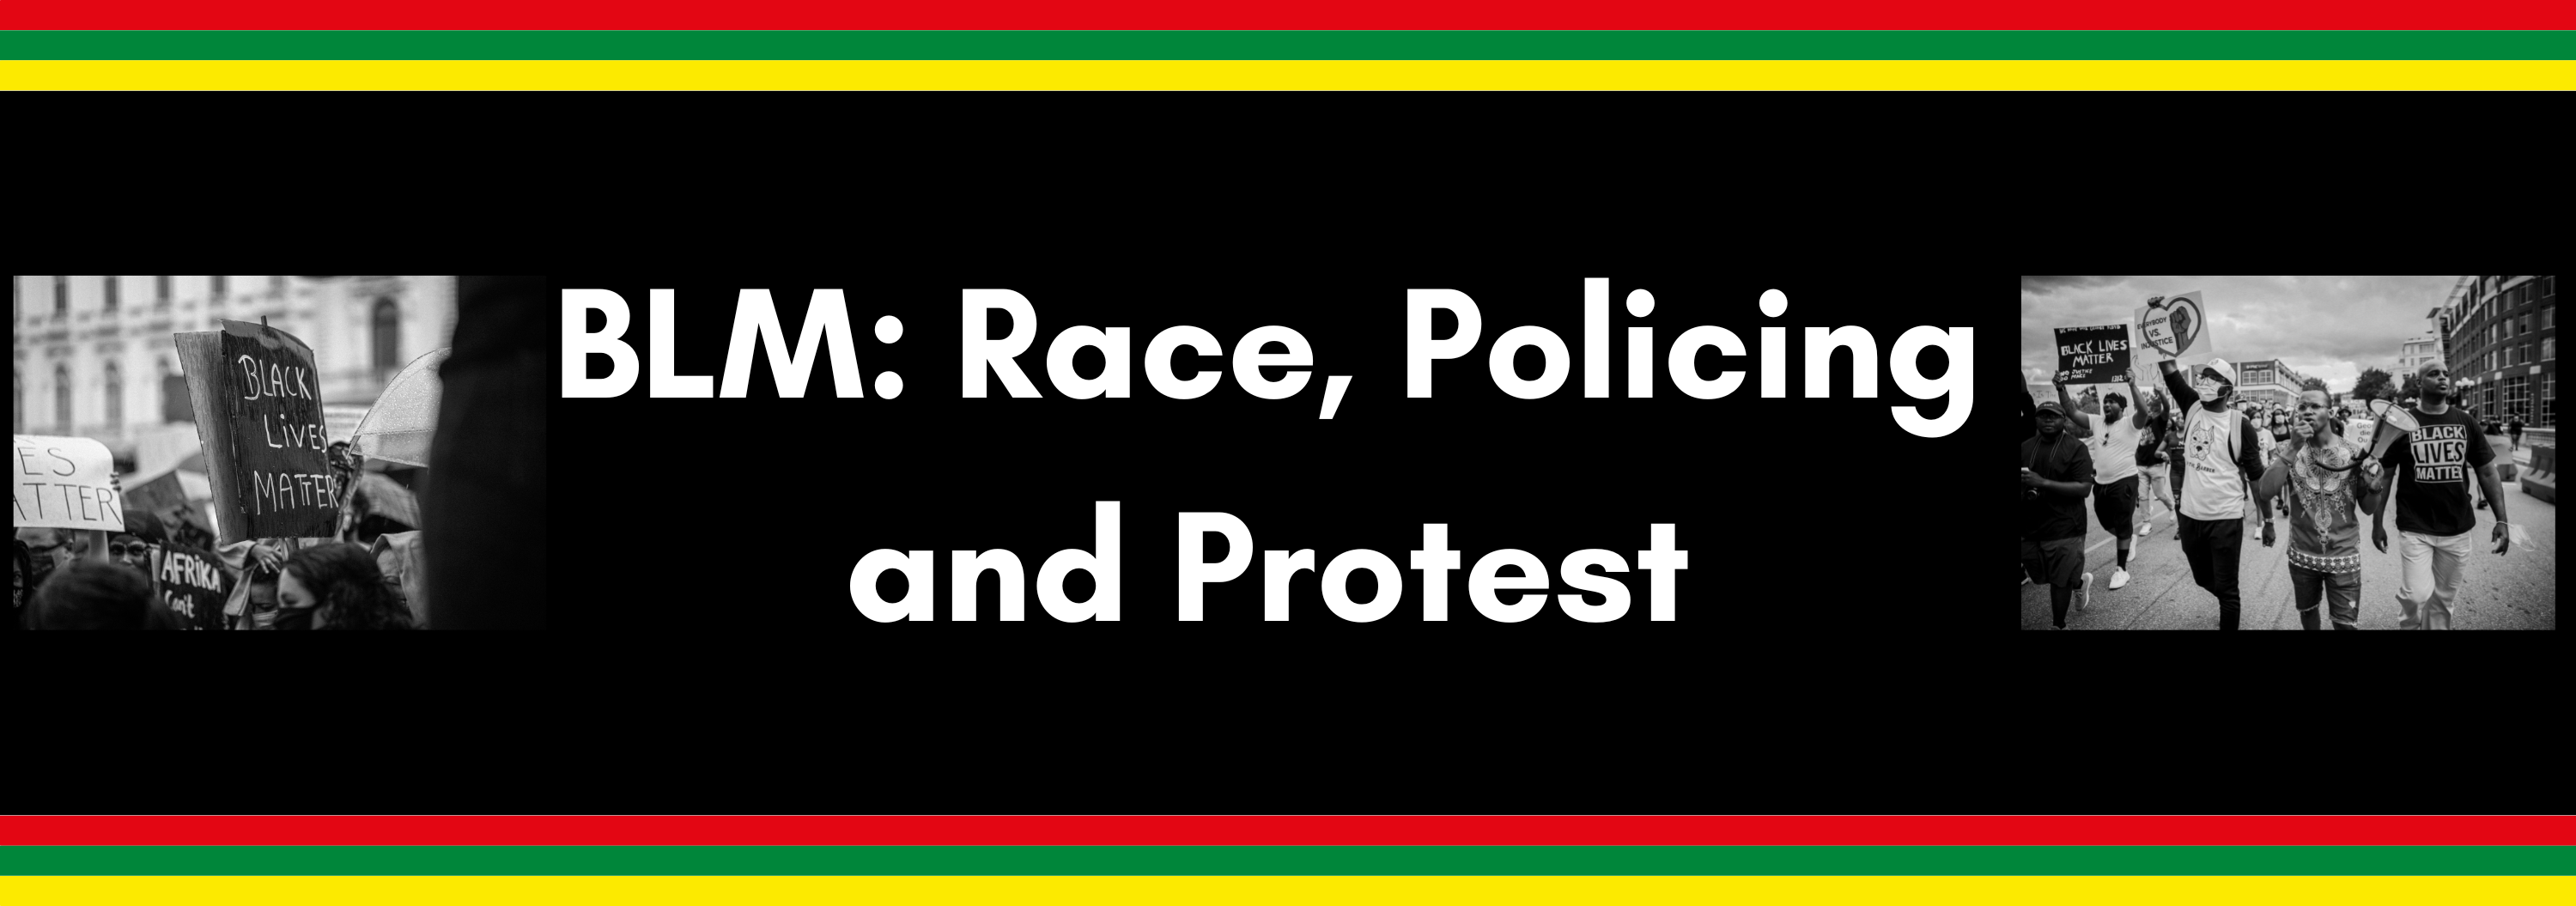 The text "BLM: Race, Policing and Protest" sits between two images of protestors holding signs in support of the Black Lives Matter movement